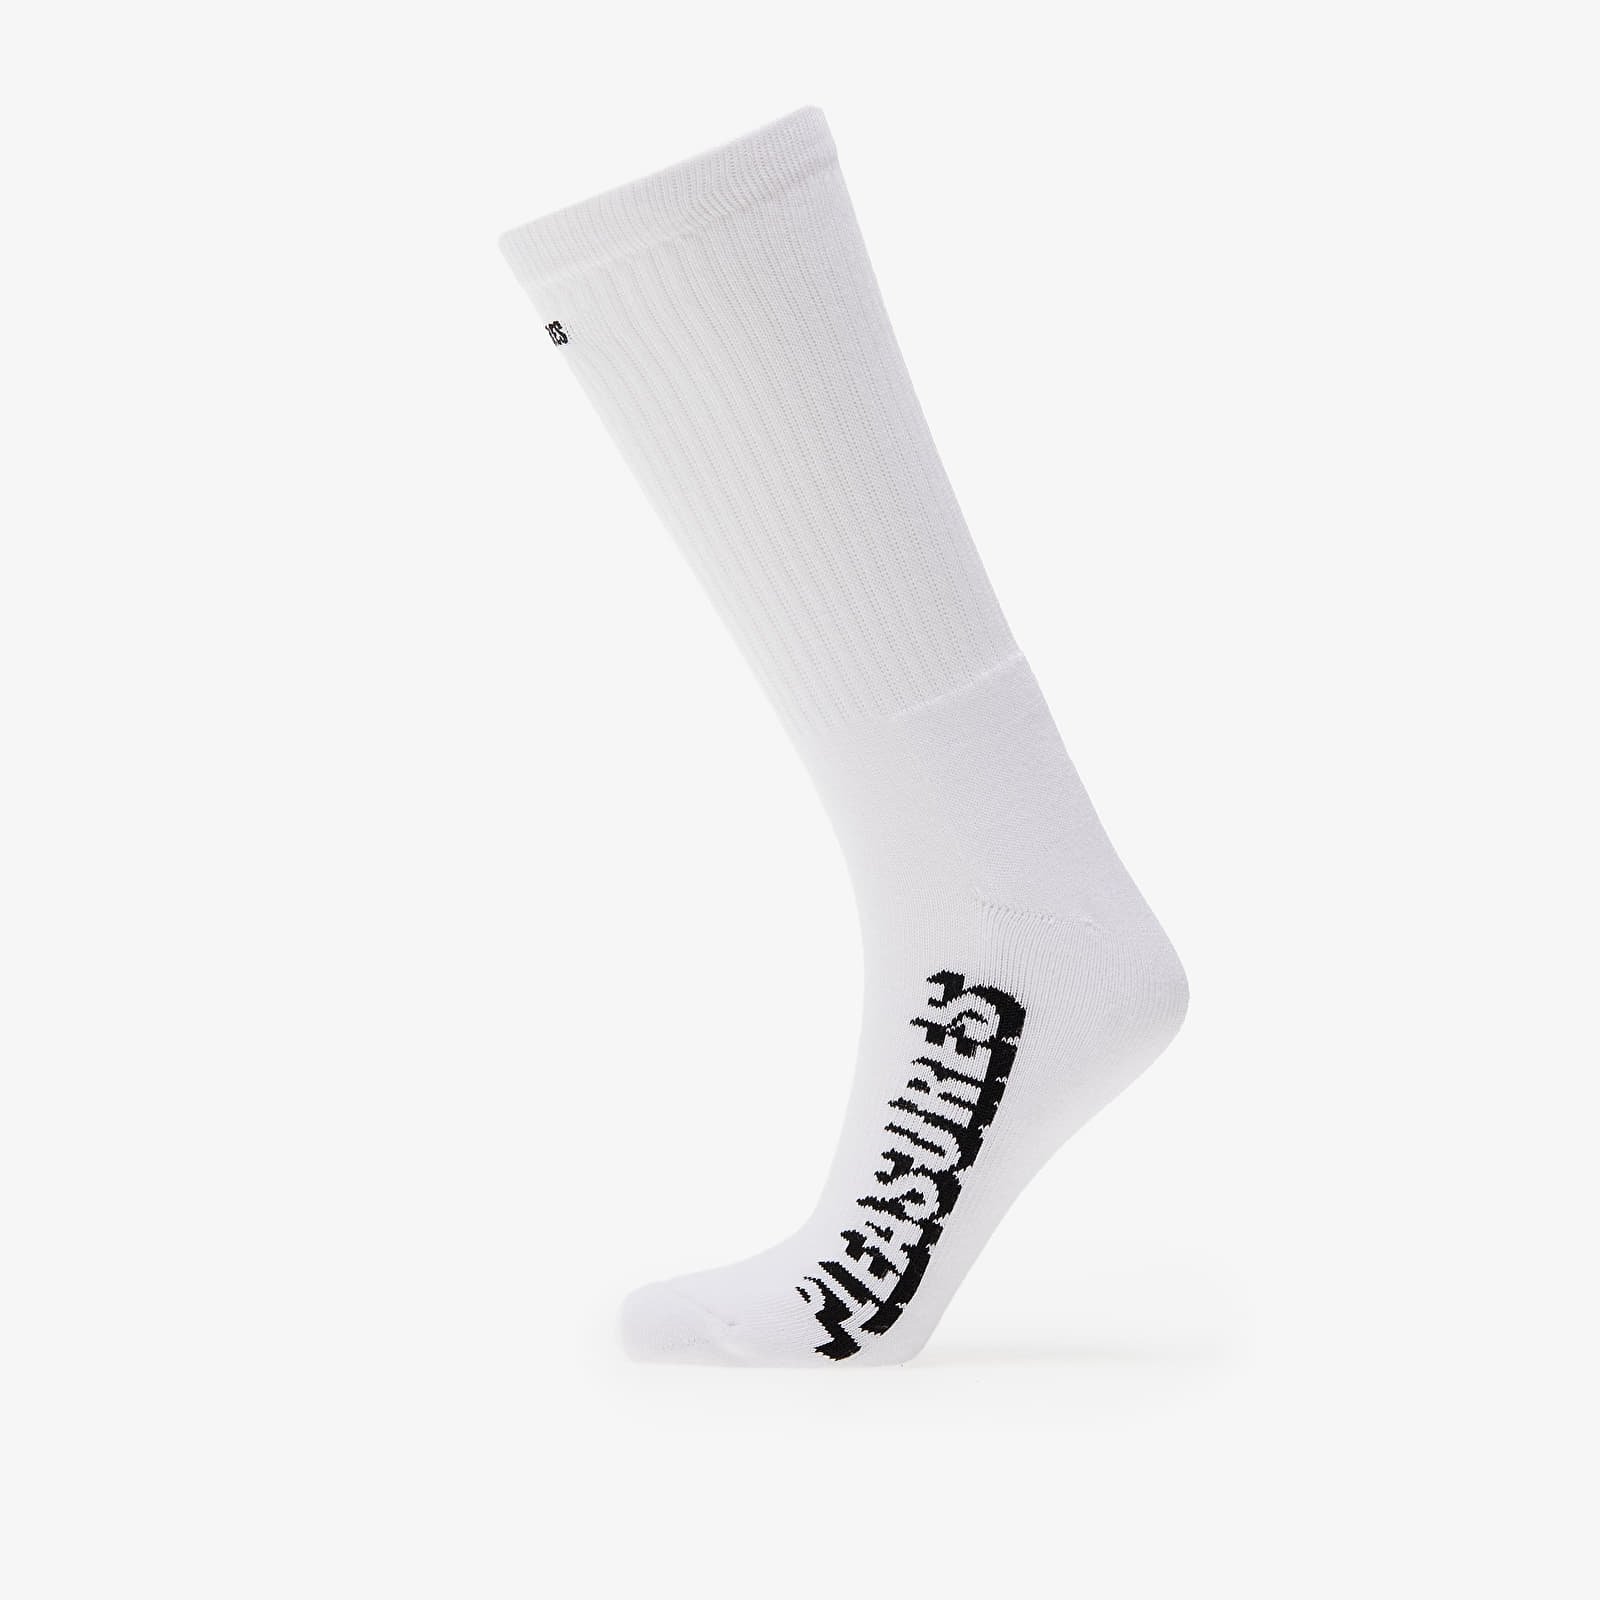 Knock Out Socks